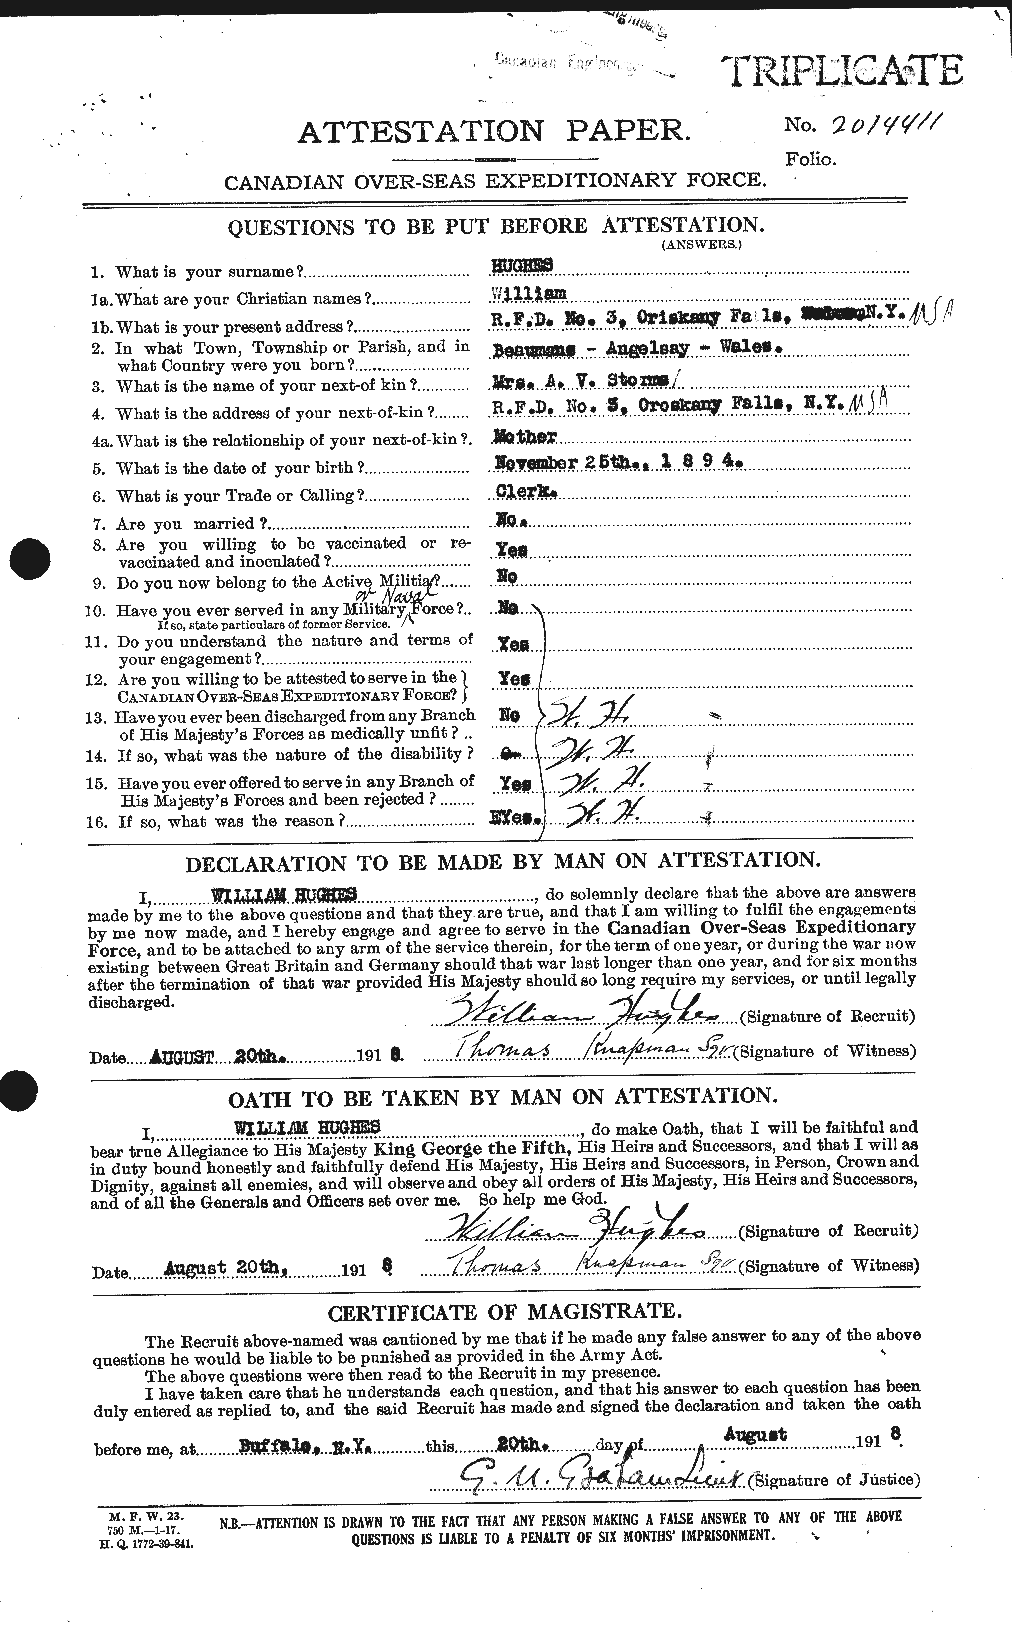 Personnel Records of the First World War - CEF 405902a